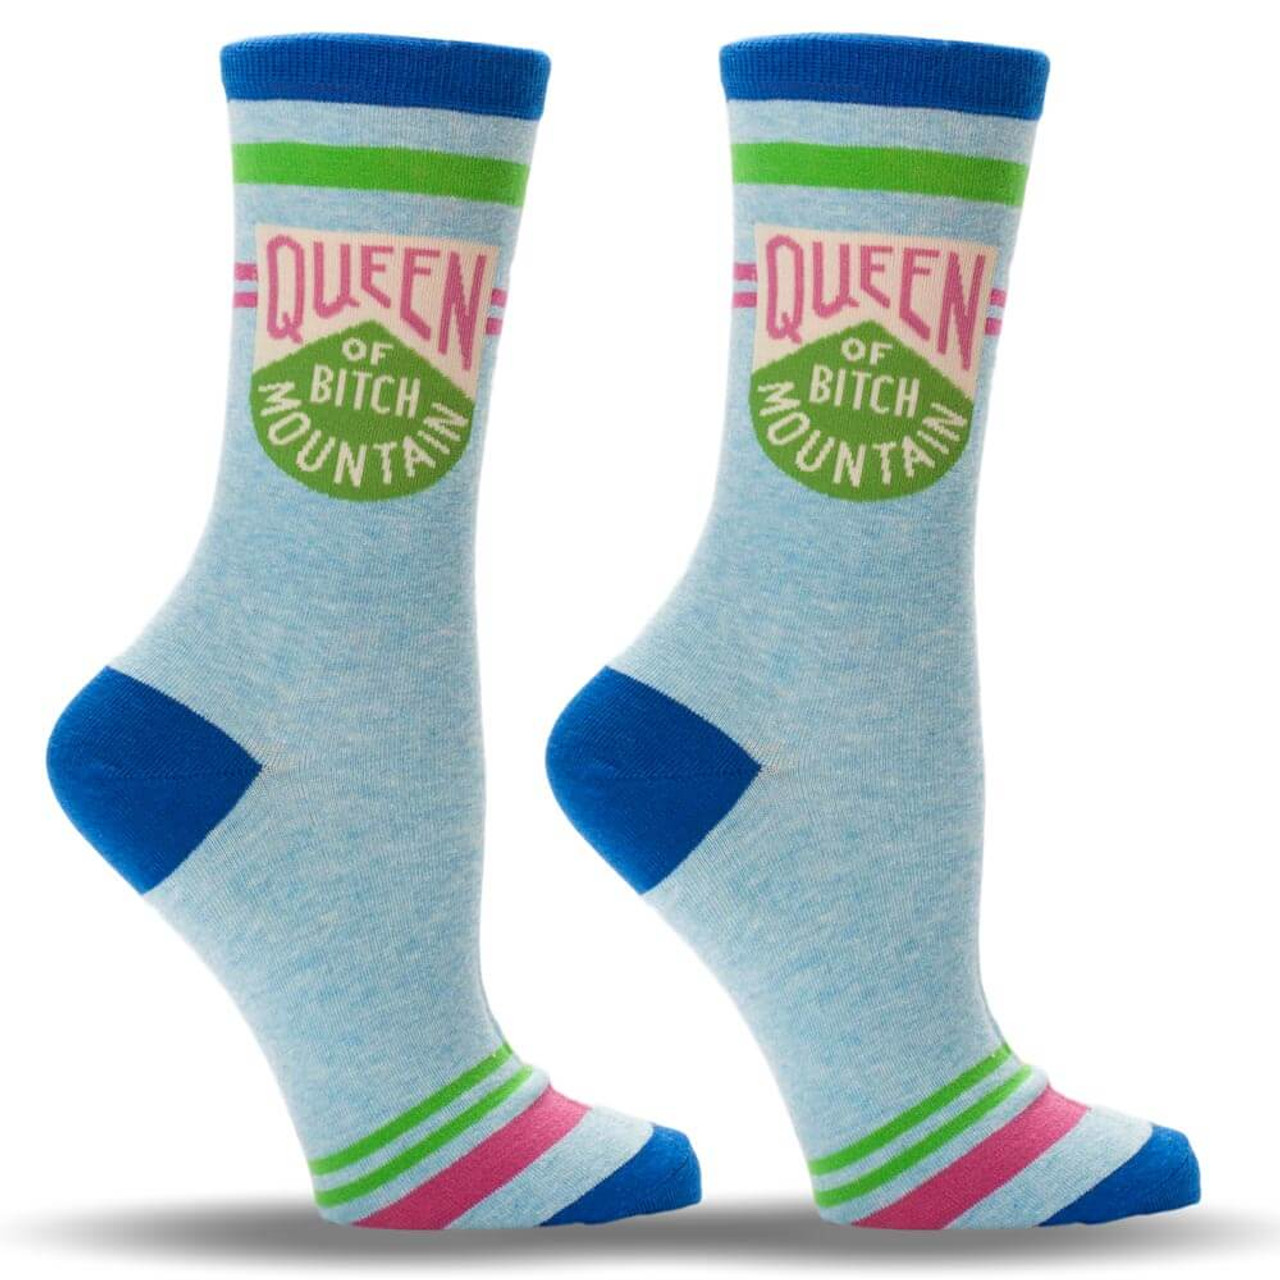 Queen Of Bitch Mountain Socks in Snarky Cool Unique Gifts